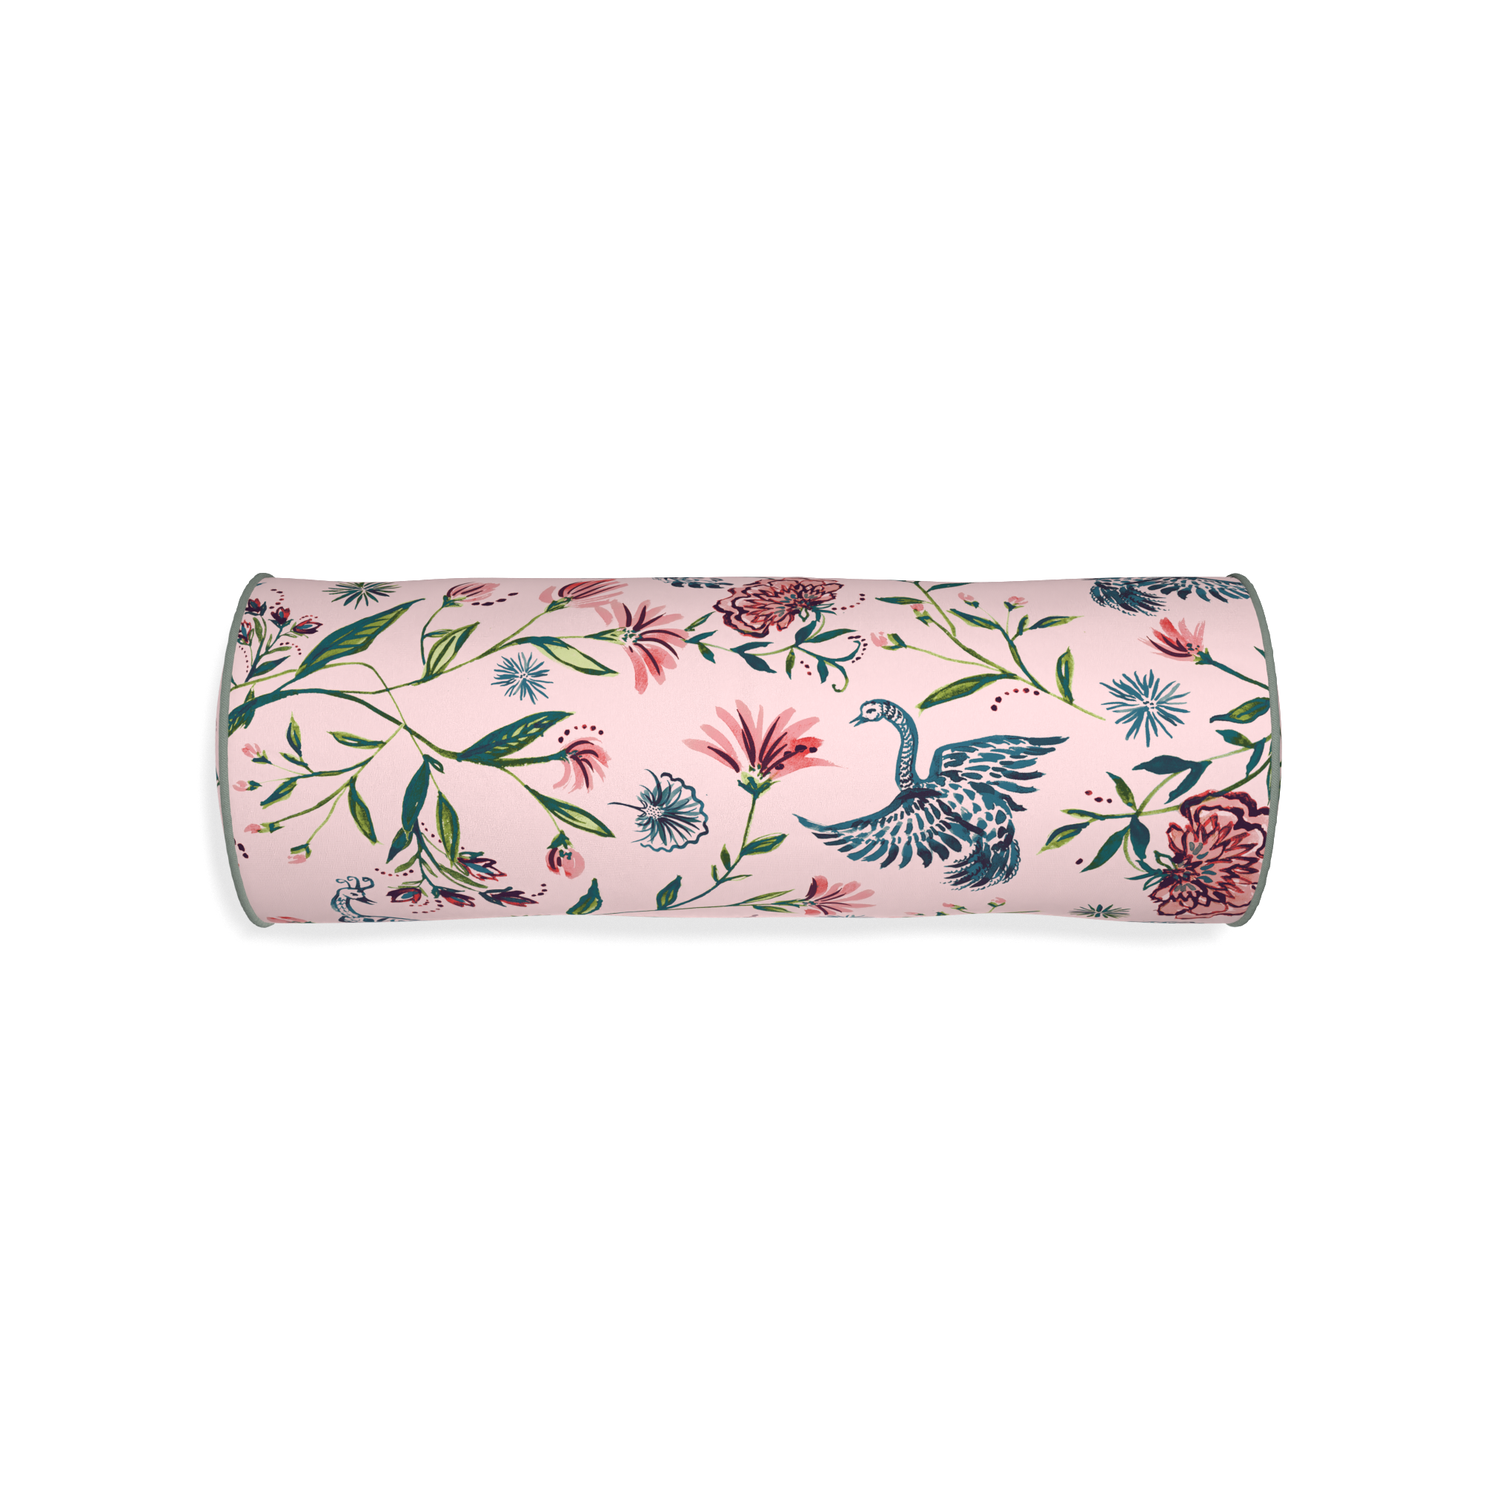 Bolster daphne rose custom rose chinoiseriepillow with sage piping on white background